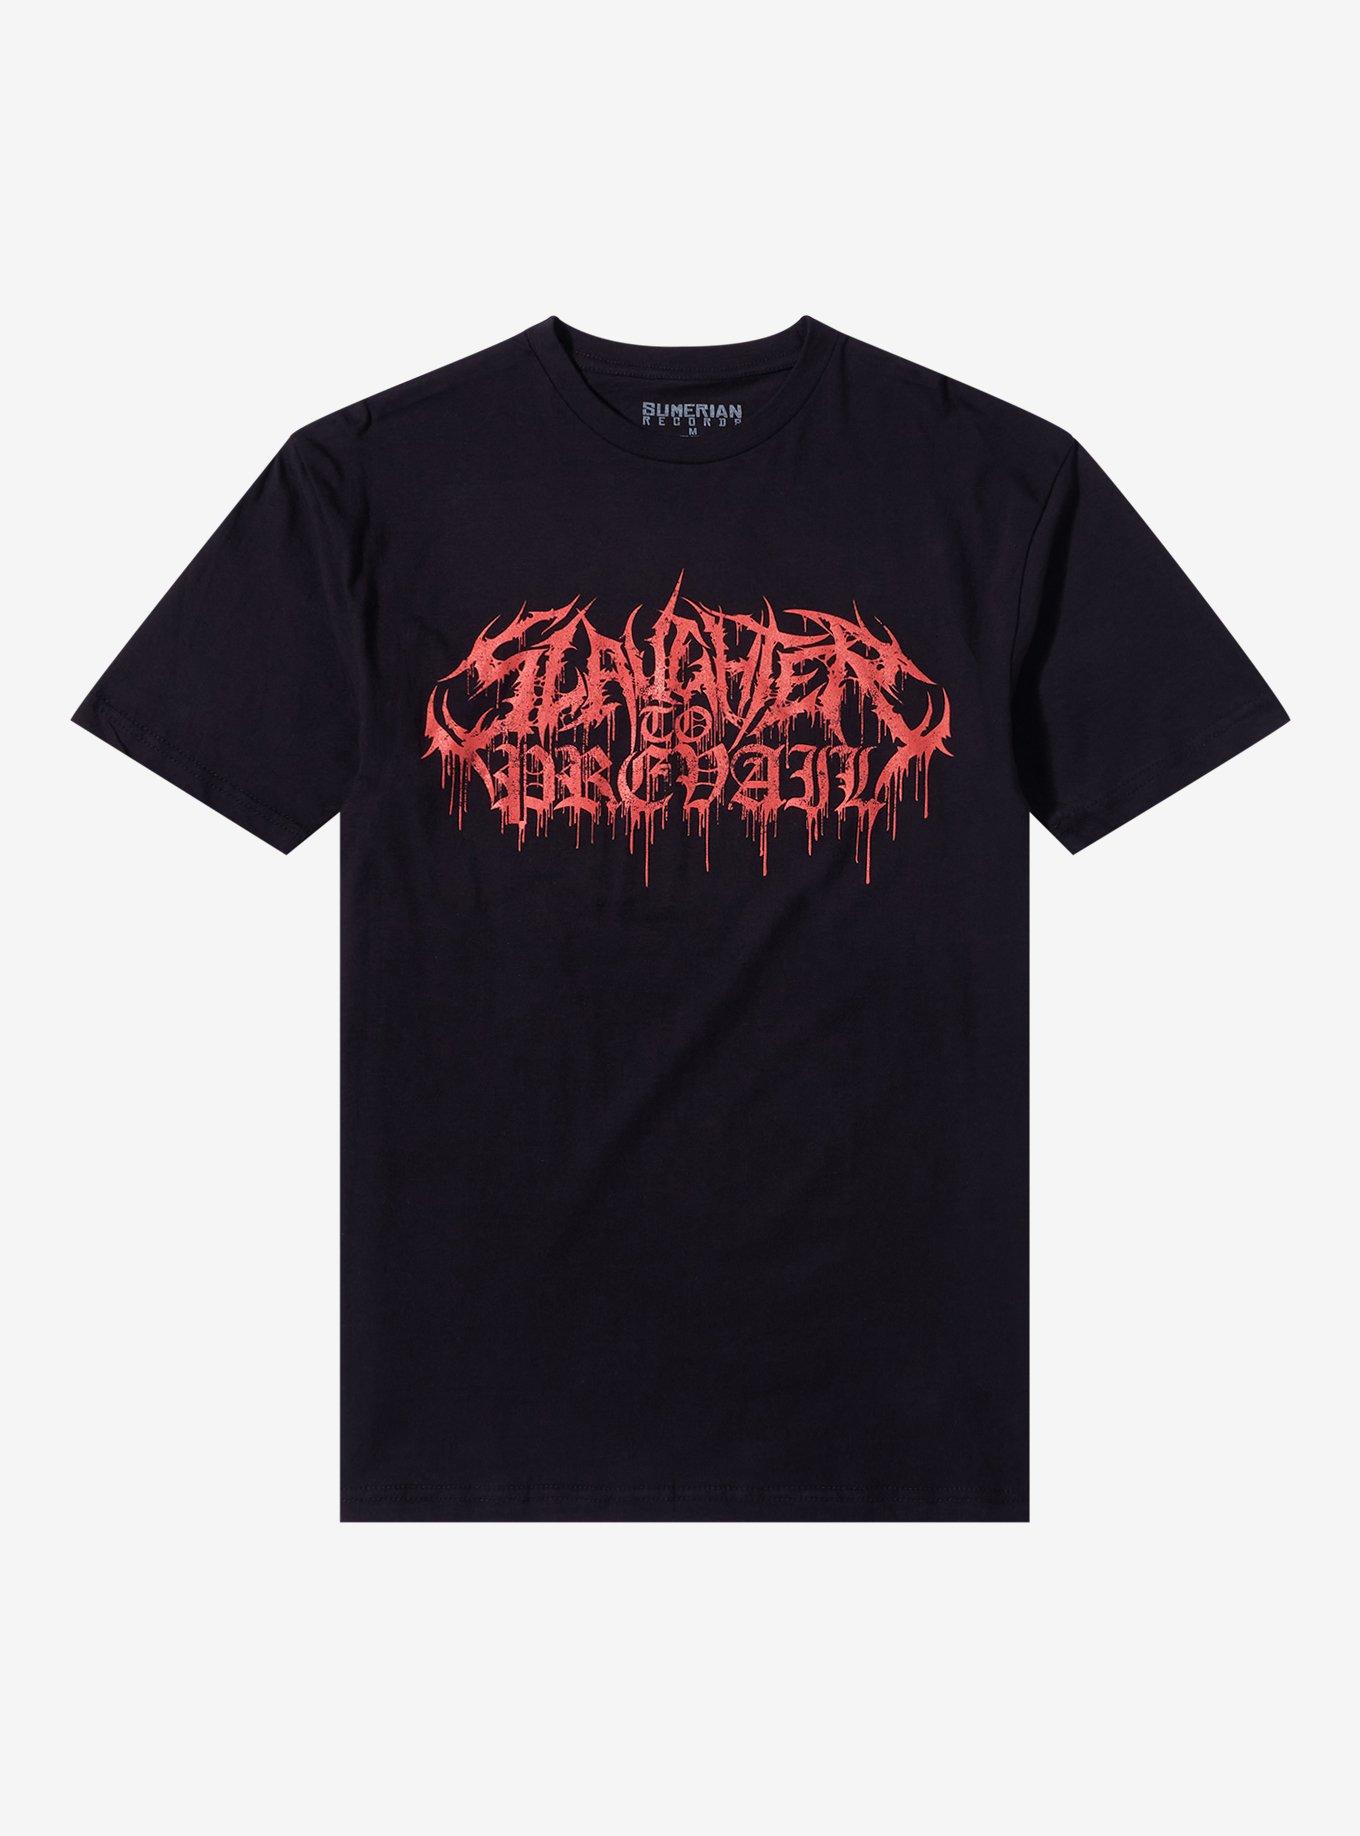 Slaughter To Prevail Dripping Logo T-Shirt